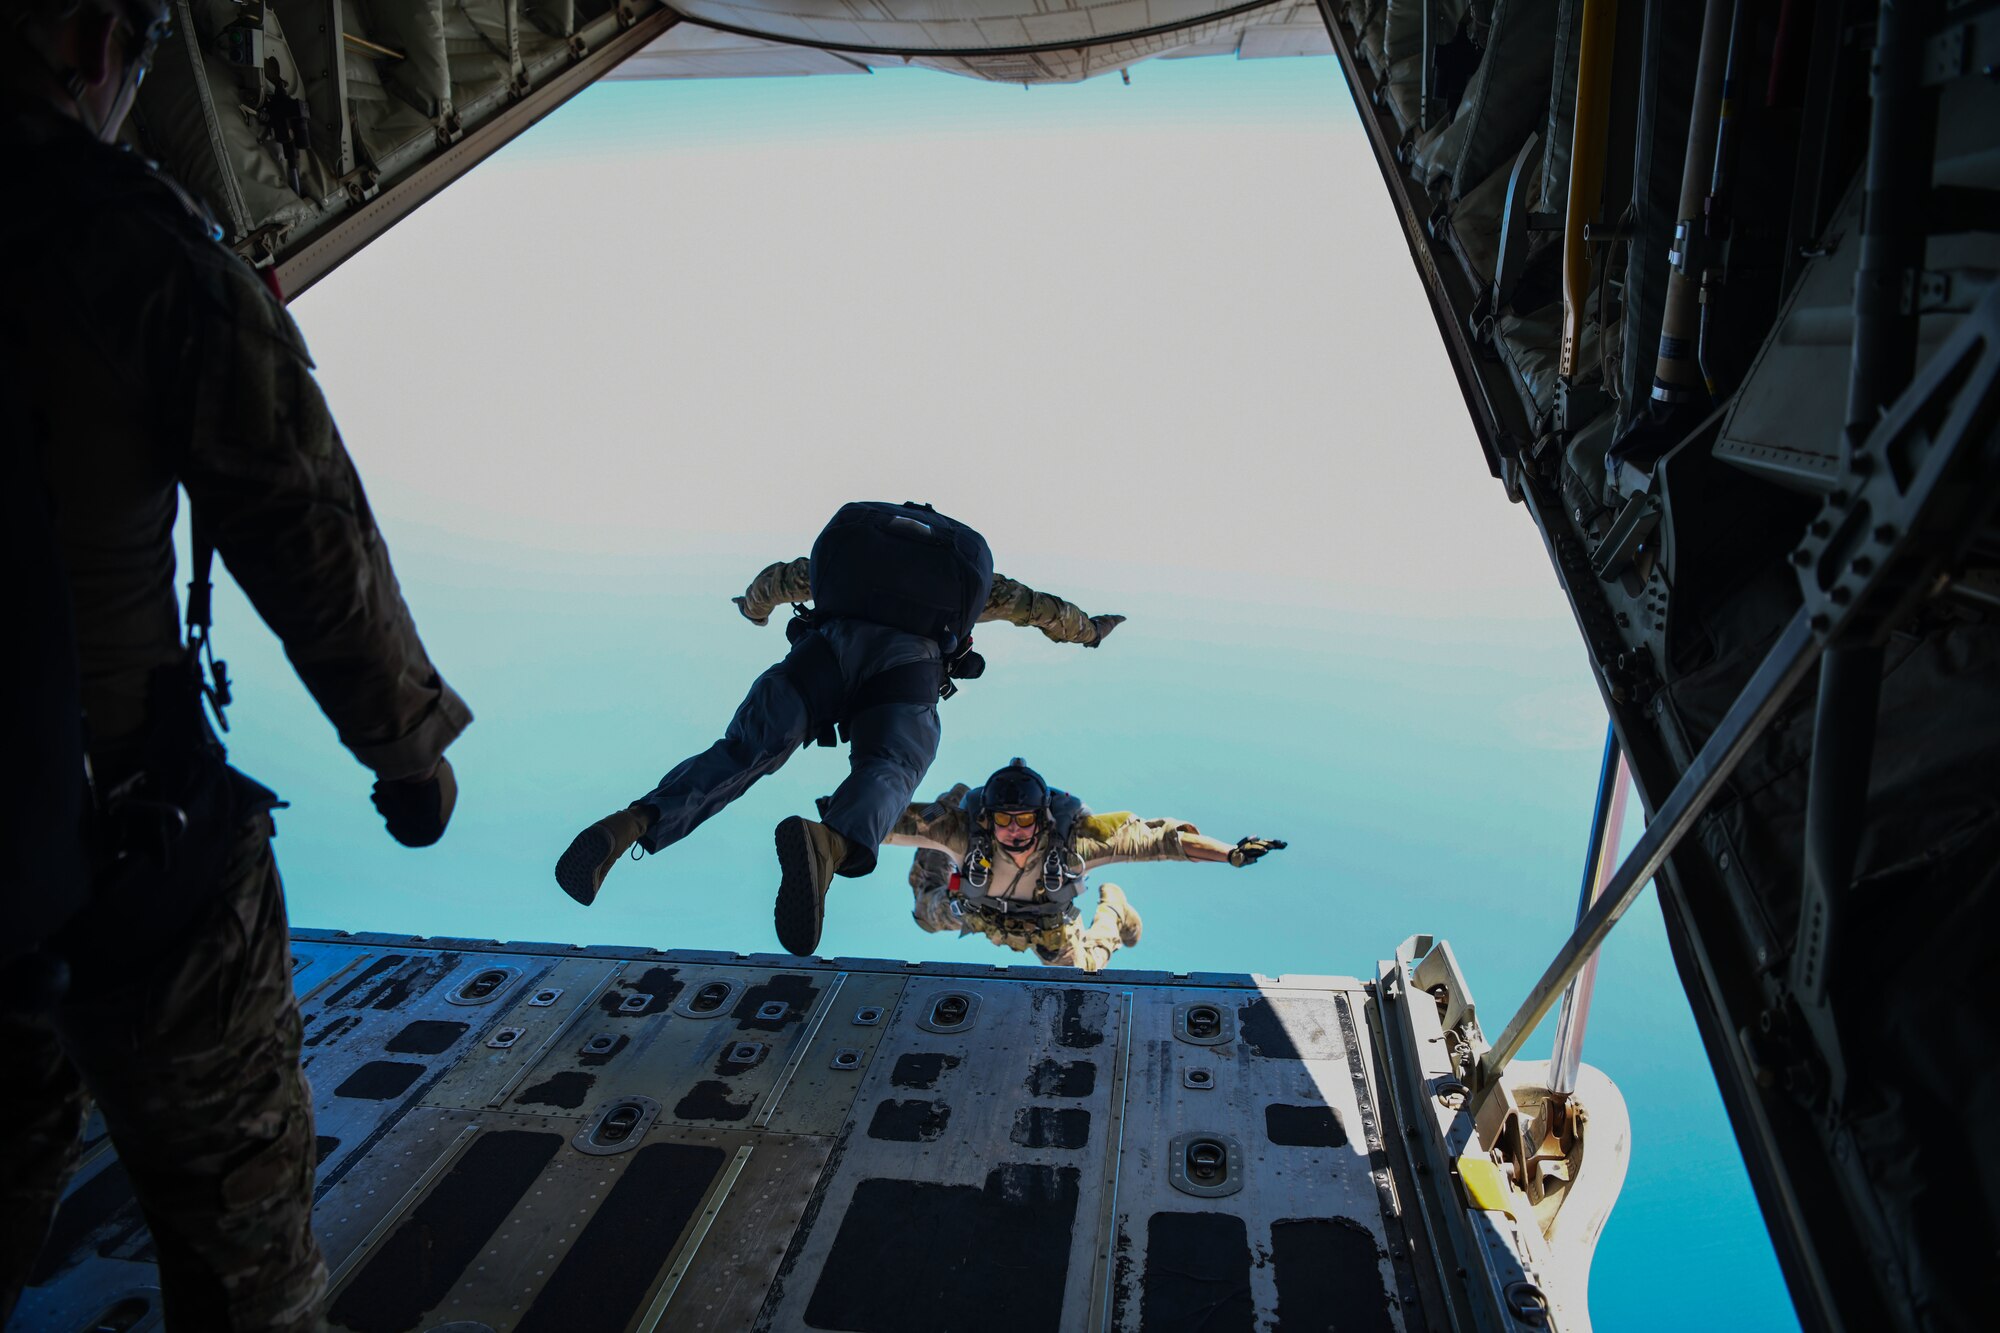 Two U.S. Air Force pararescuemen assigned to the 82nd Expeditionary Rescue Squadron, jump from a U.S. Marine Corps KC-130J Super Hercules over East Africa, Feb. 15, 2021. The 82nd ERQS maintains jump proficiency to provide secure, reliable, flexible combat search, rescue, and recovery capabilities in support of U.S. Africa Command in North and East Africa. The 82nd ERQS are qualified experts in advanced weapons and small unit tactics, airborne and military free fall, combat divers, high angle and confined space rescue operations, small boat and vehicle craft utilization, rescue swimmers, and battlefield trauma-paramedics. (U.S. Air Force photo by Senior Airman Ericka A. Woolever)